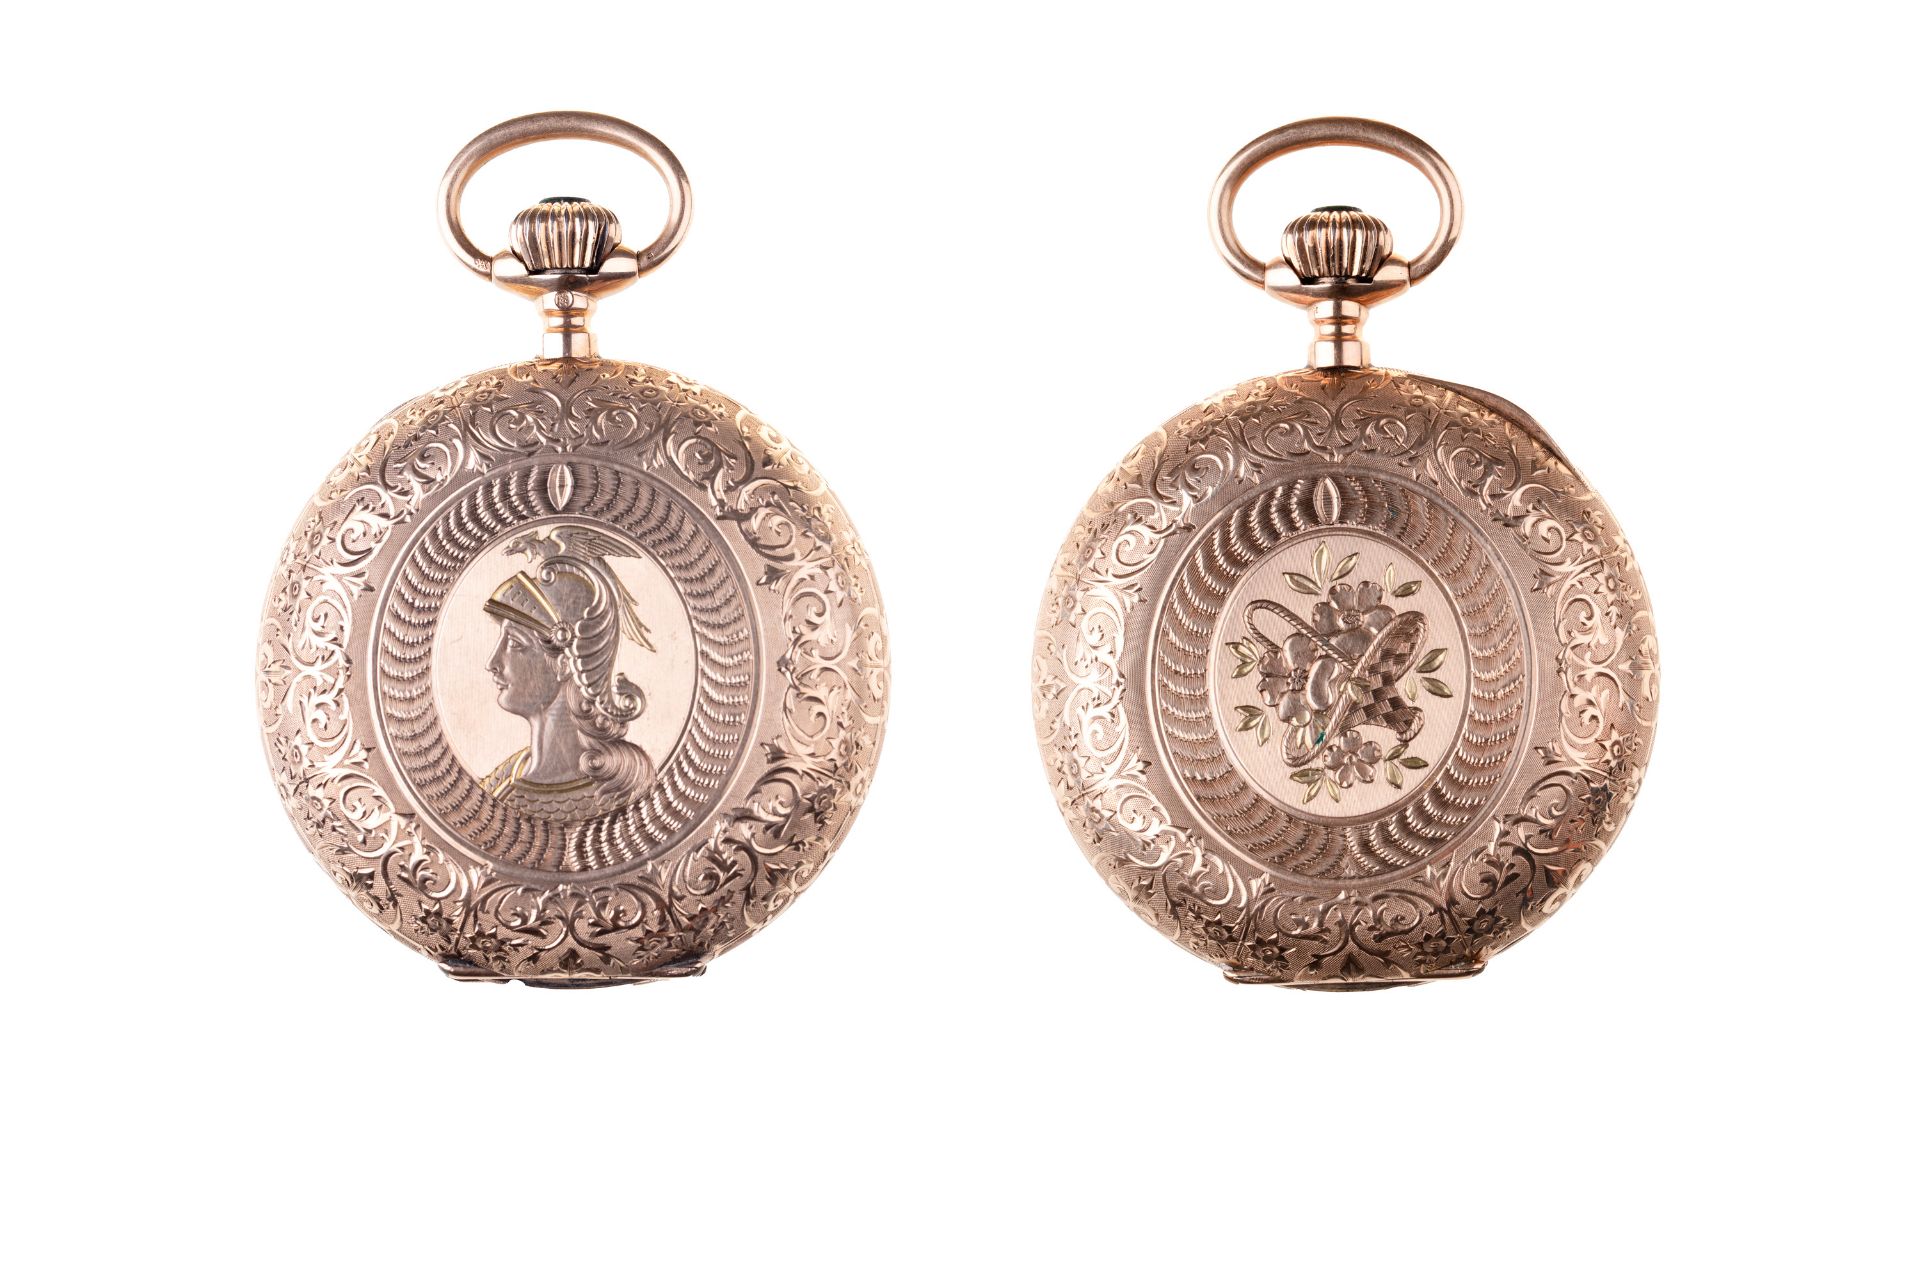 GOLD POCKET WATCH WITH THREE CASES | (Switzerland - end of the 19th century)